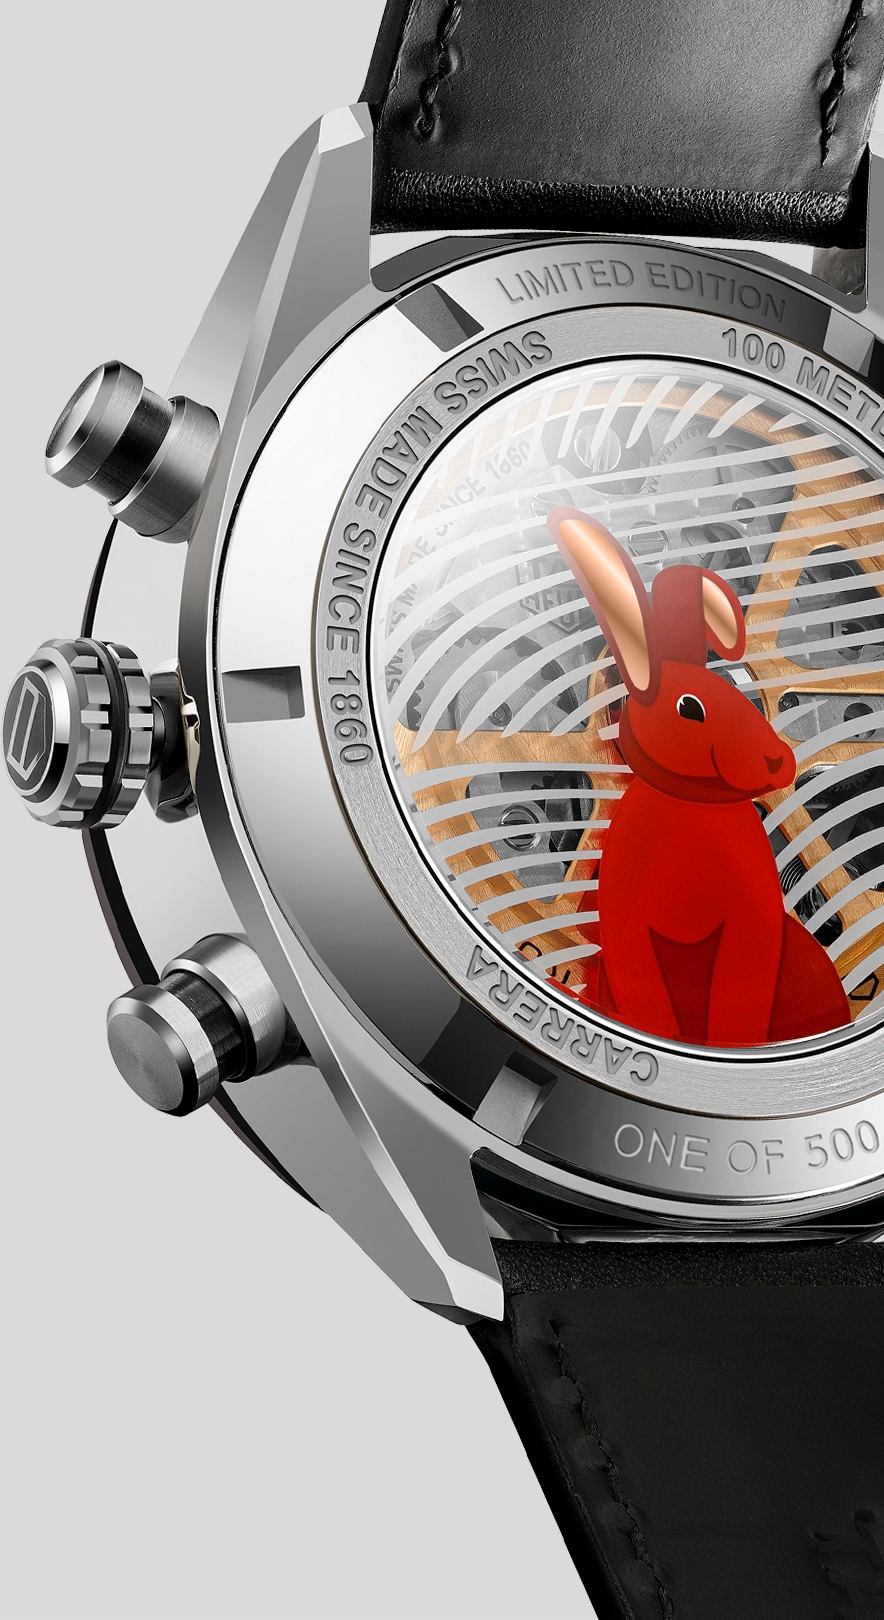 Limited-edition Tag Heuer watch launched for 'Year Of The Rabbit